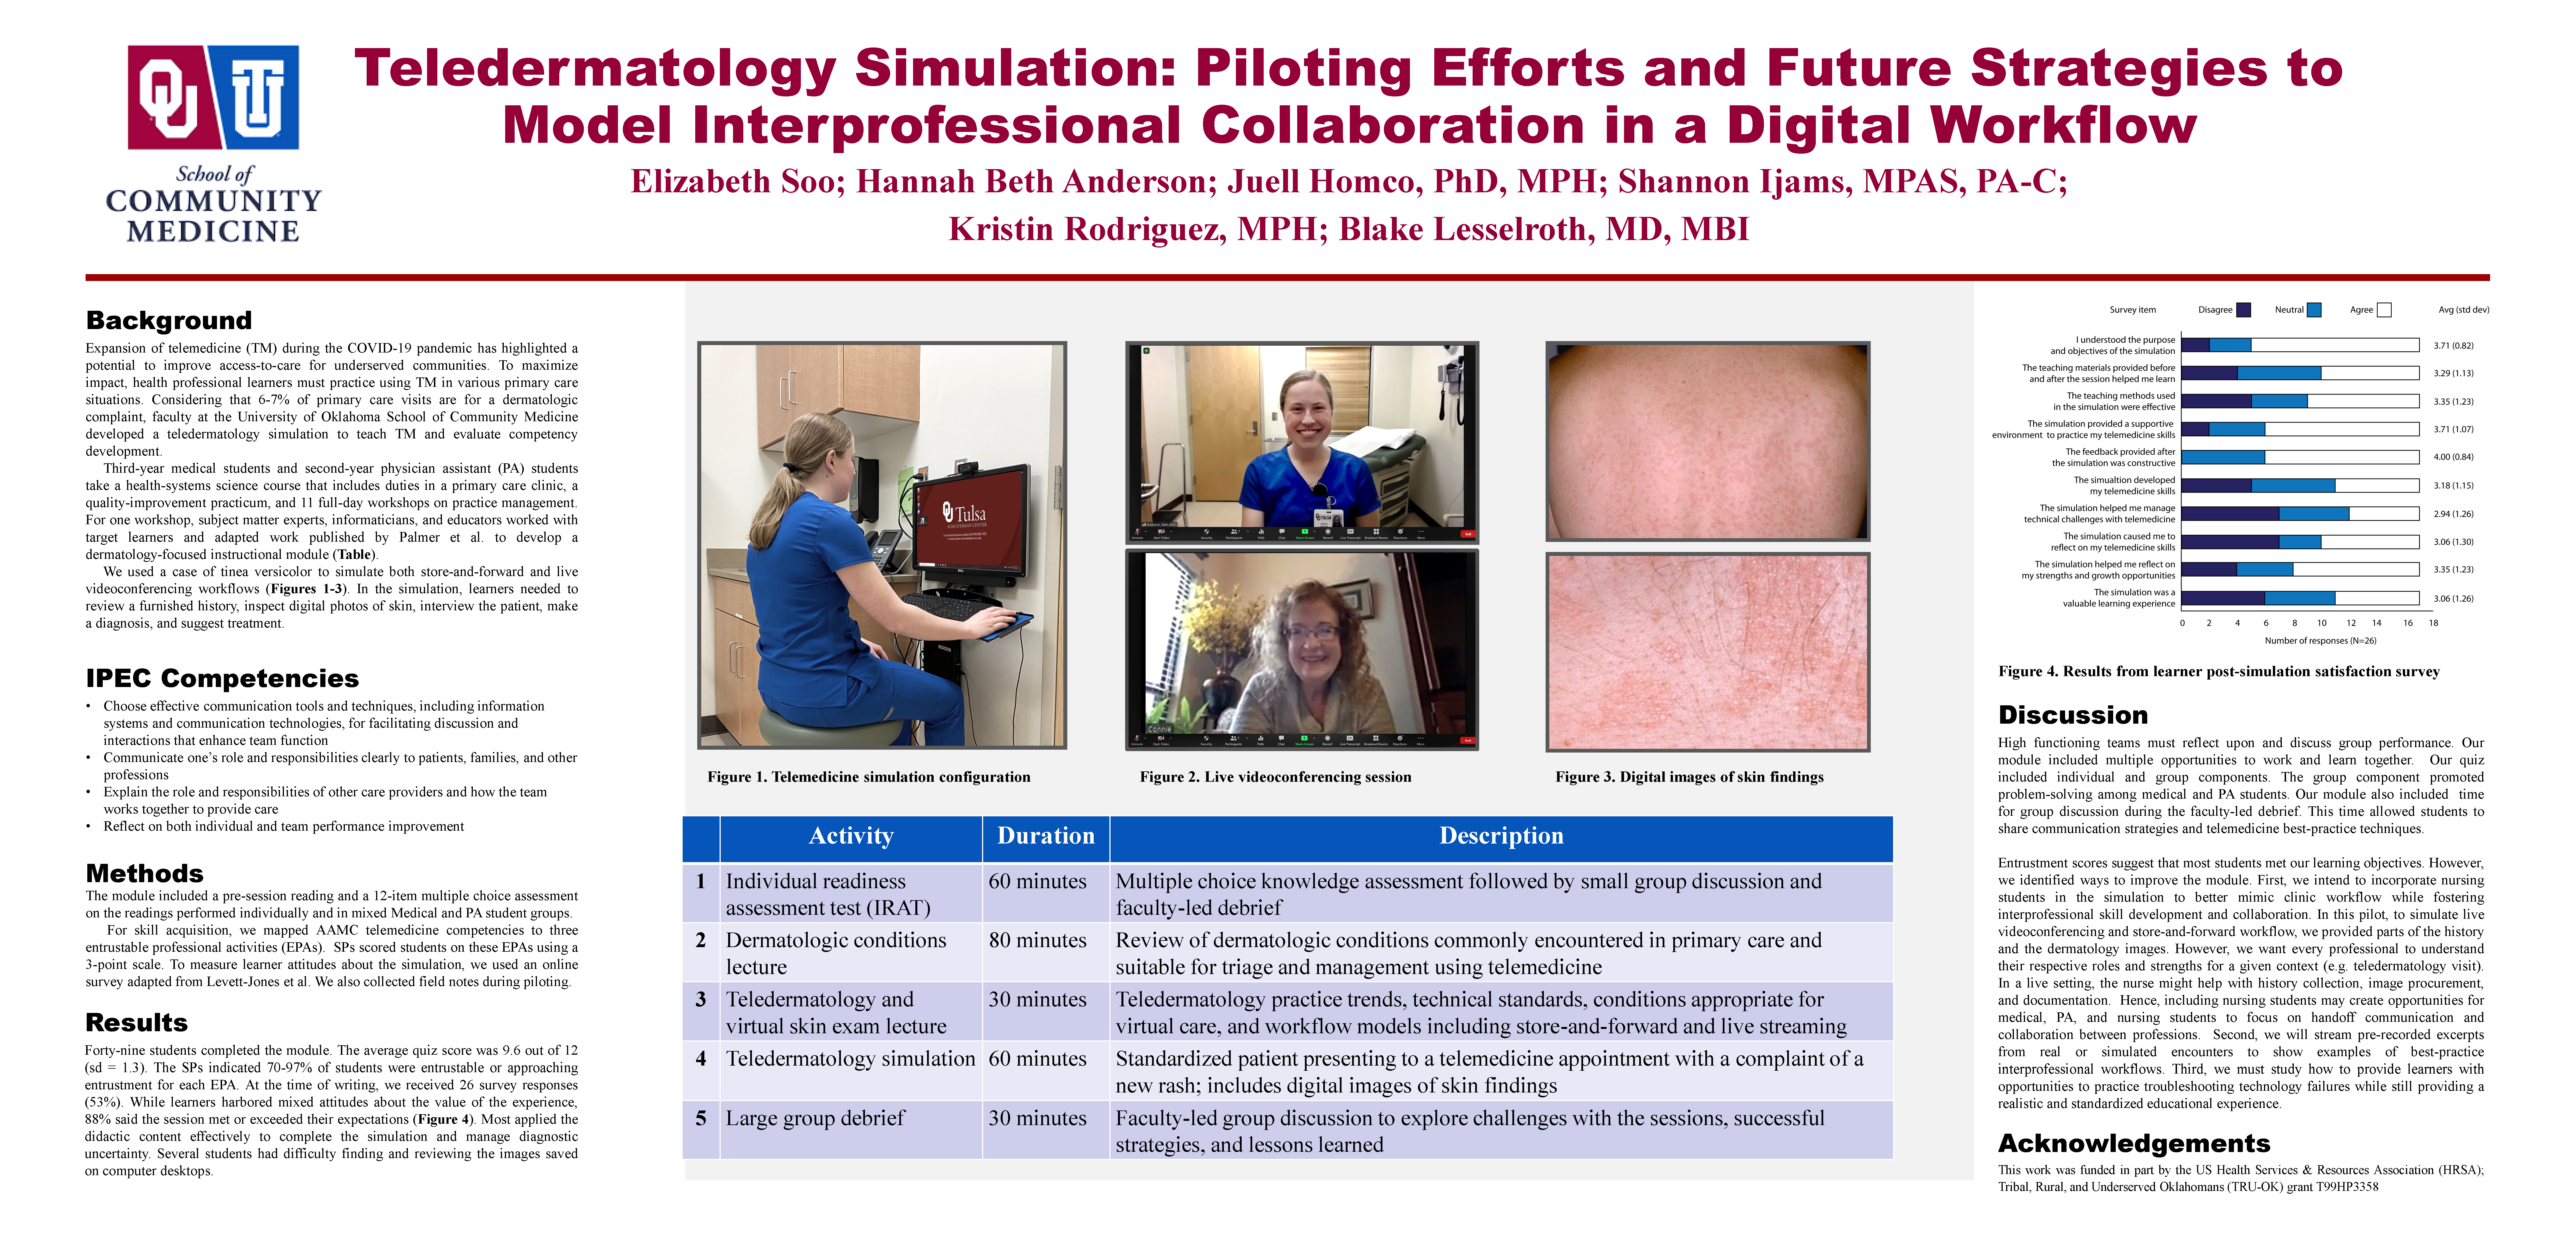 Teledermatology simulation: Piloting efforts and future strategies to model interprofessional collaboration in a digital workflow poster